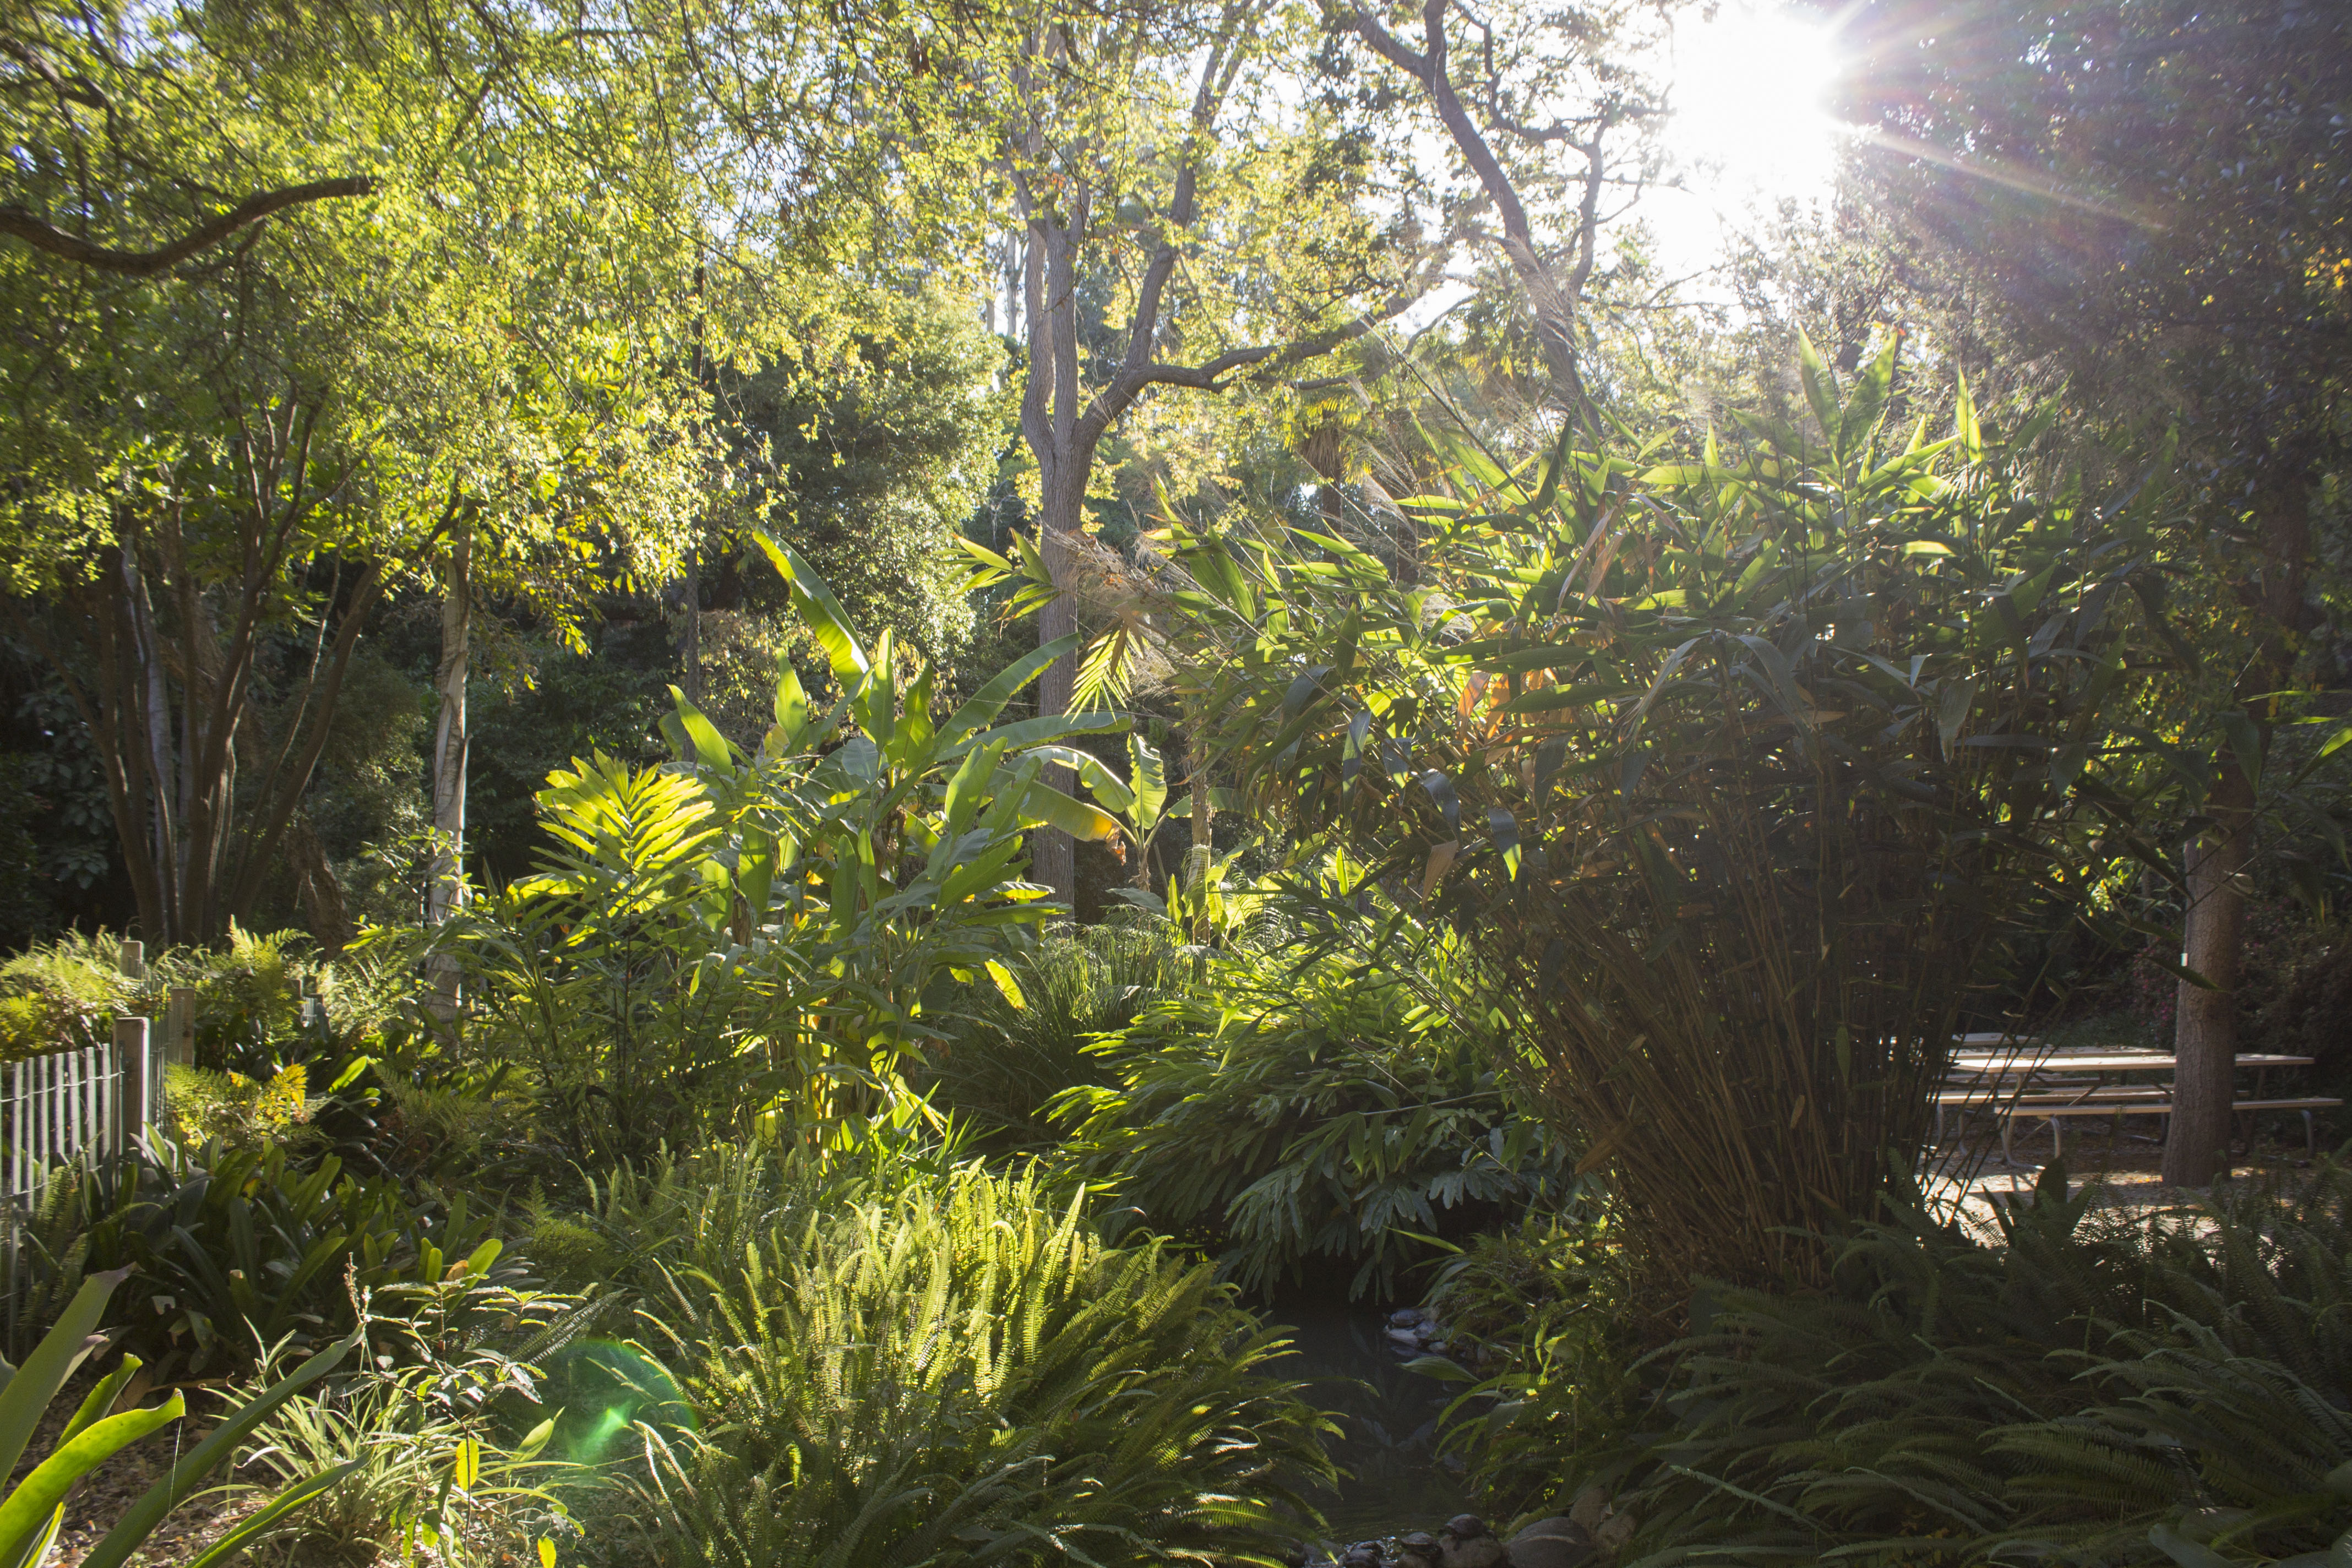 Open to the public, the Mildred E. Mathias Botanical Garden is a botanical wonder hidden in plain sight on the UCLA campus.